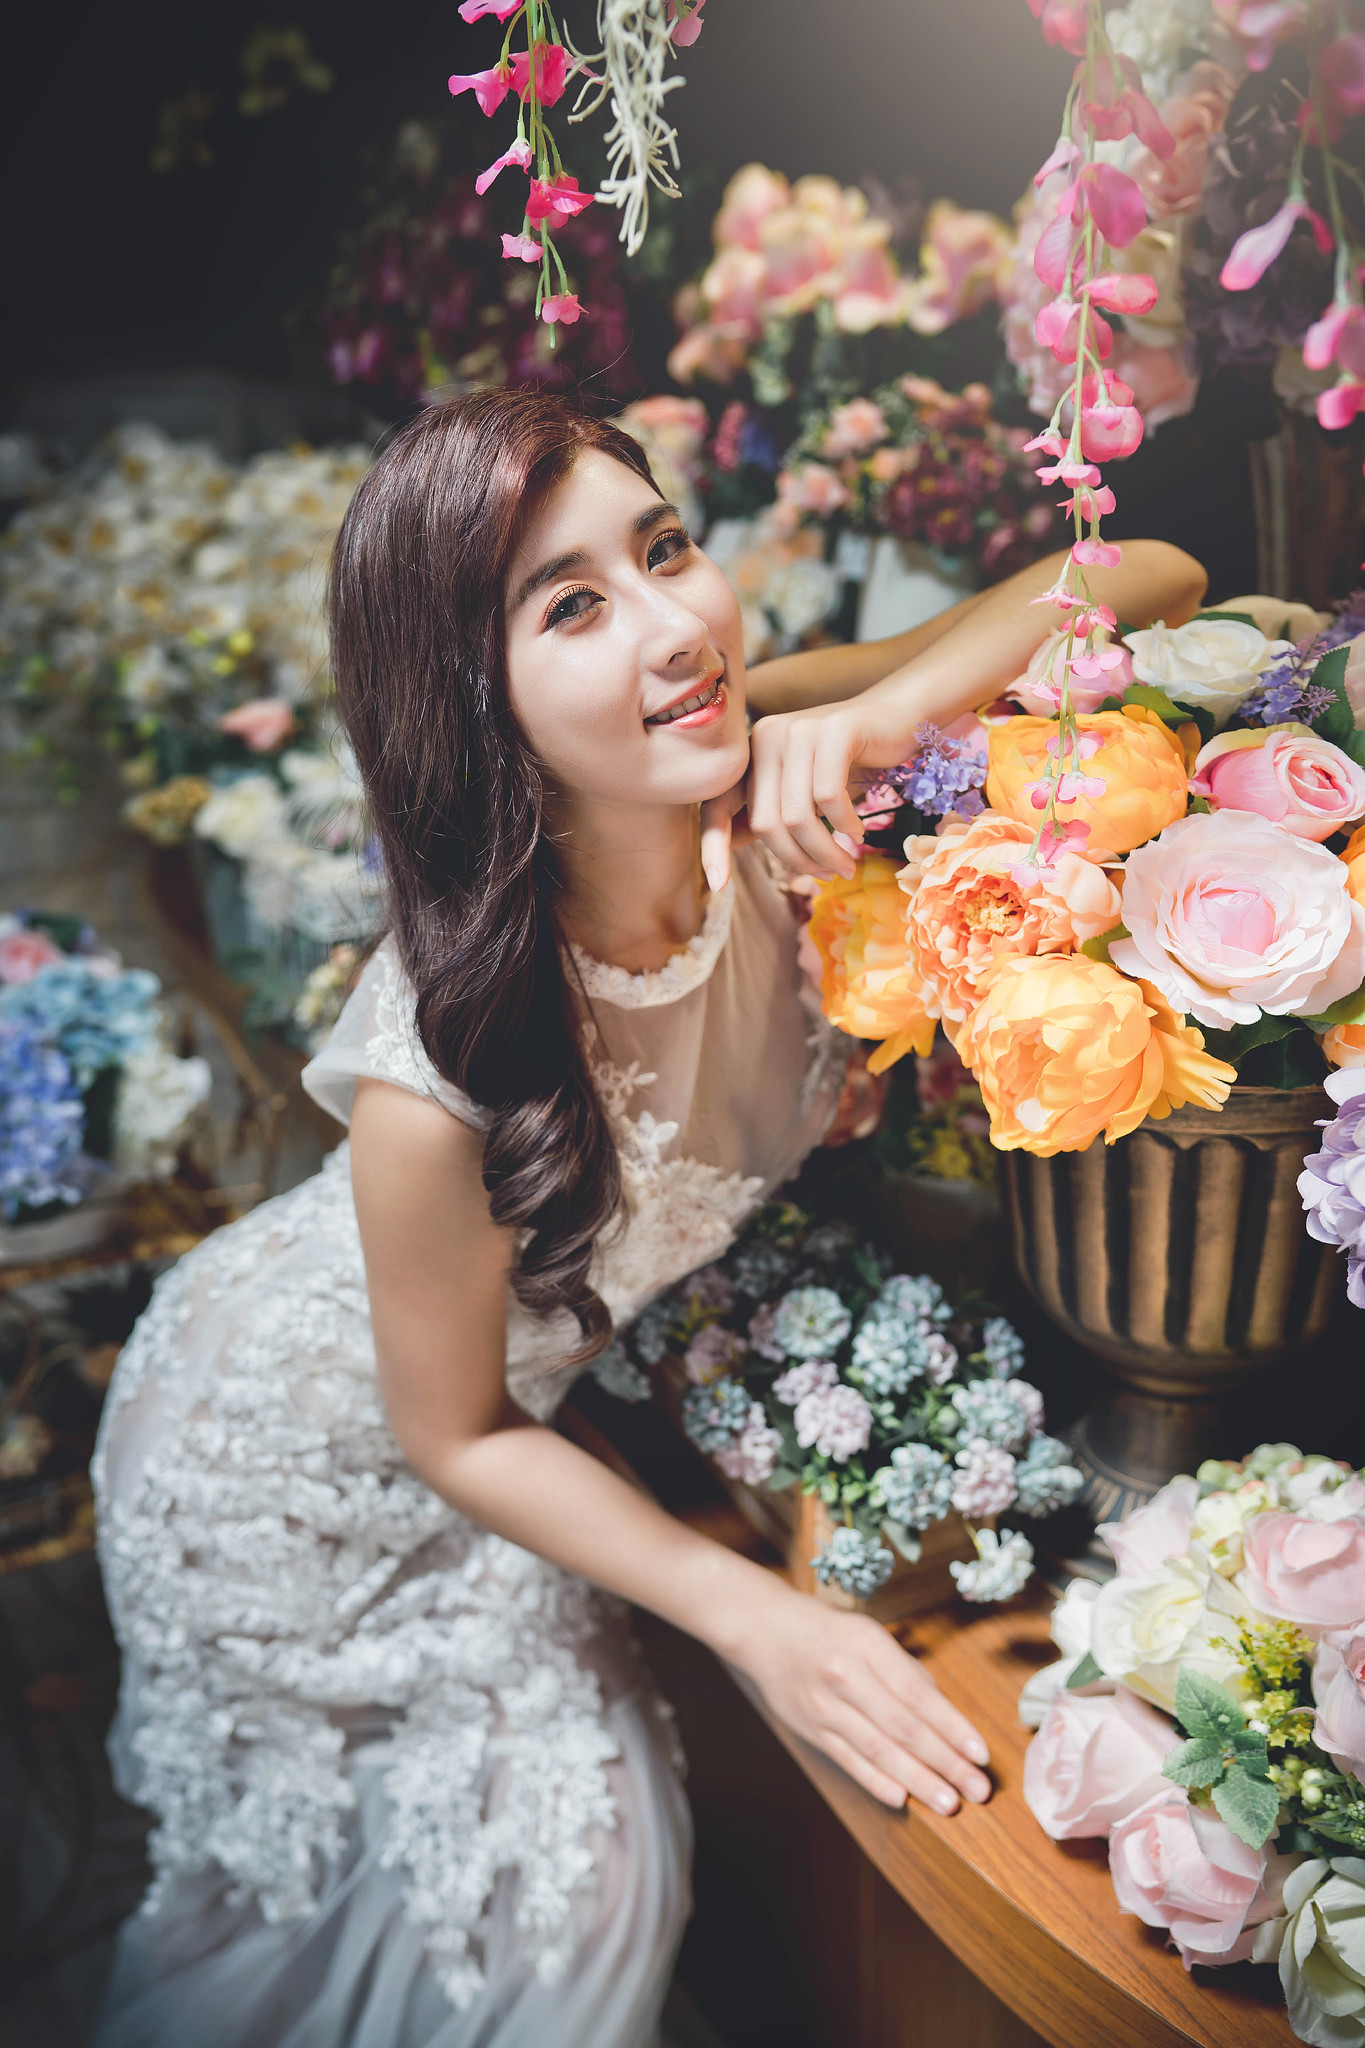 Asian Women Model Women Indoors Indoors Flowers Plants Brunette Long Hair Looking At Viewer White Dr 1365x2048